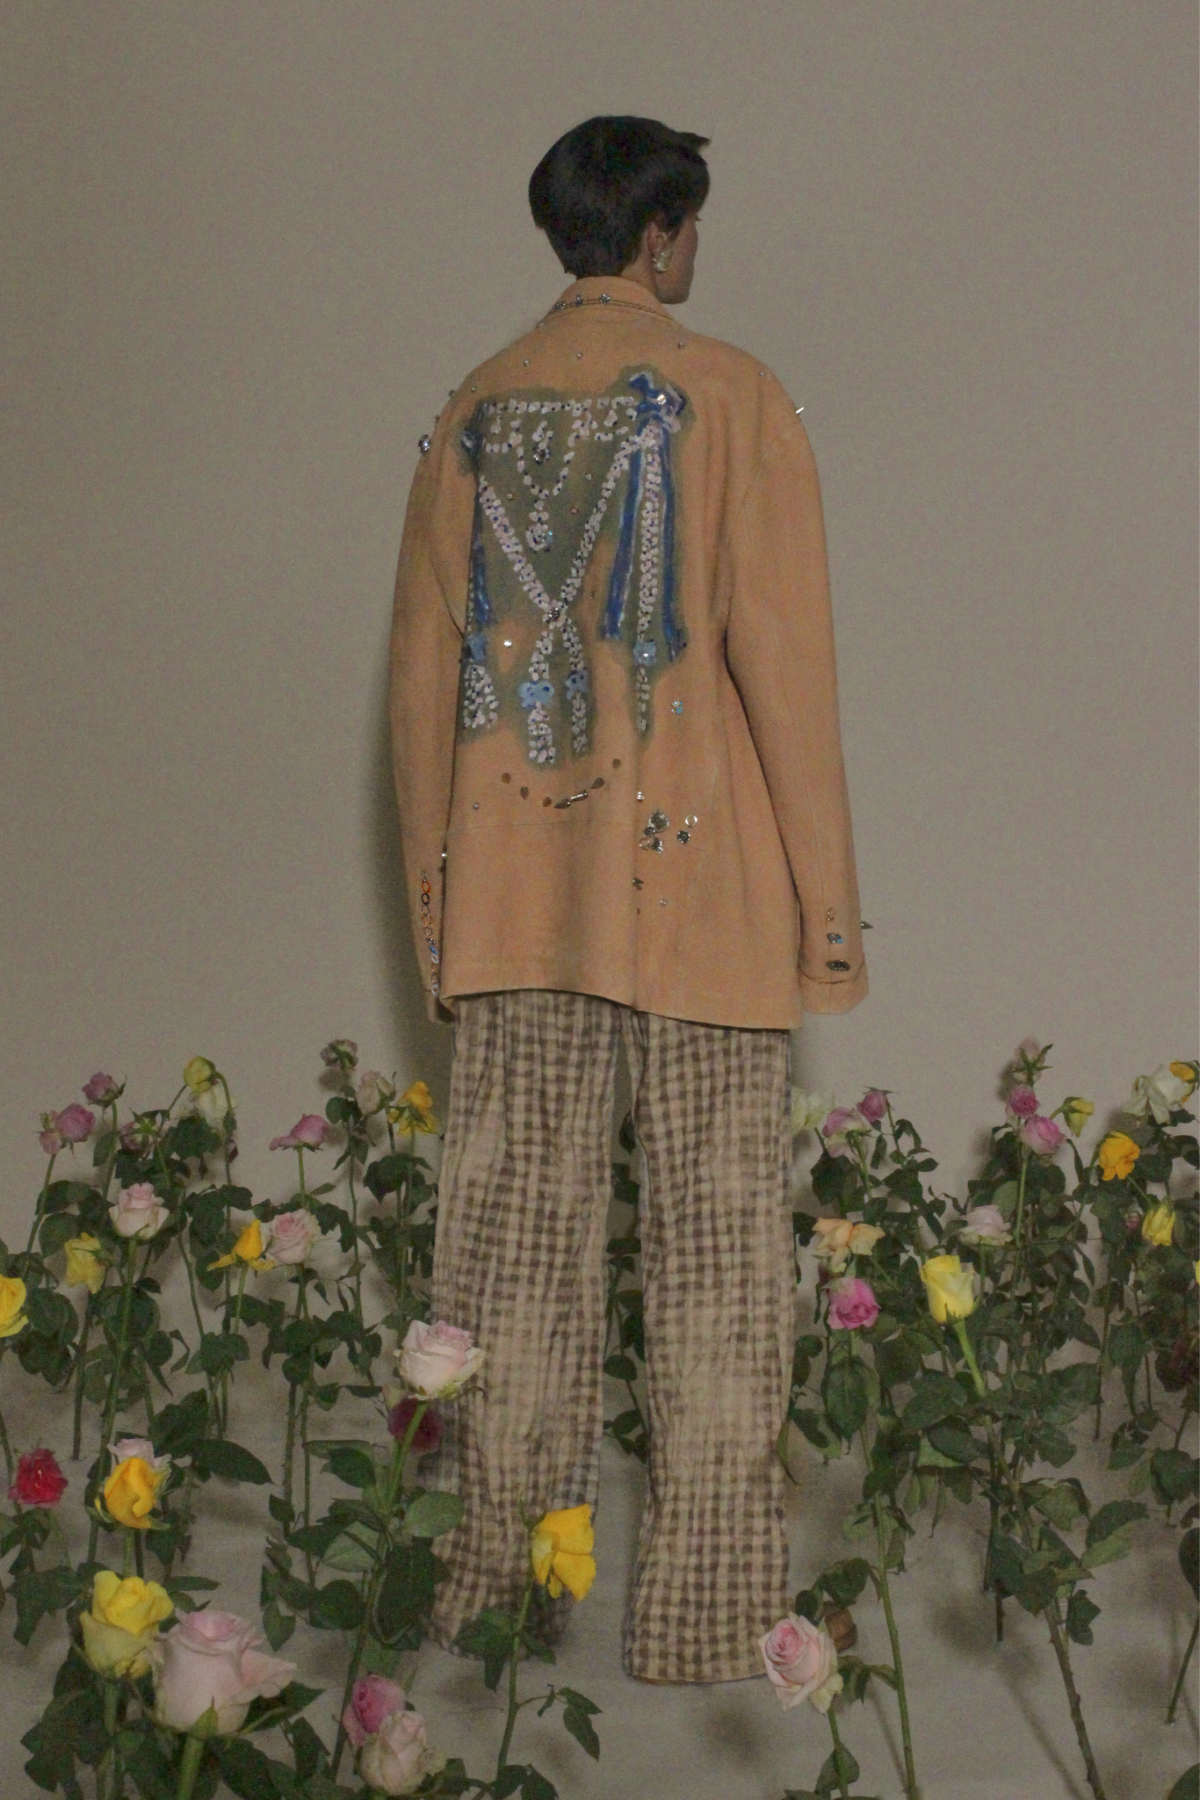 Acne Studios Presents Its New Menswear Spring/Summer 2023 Collection